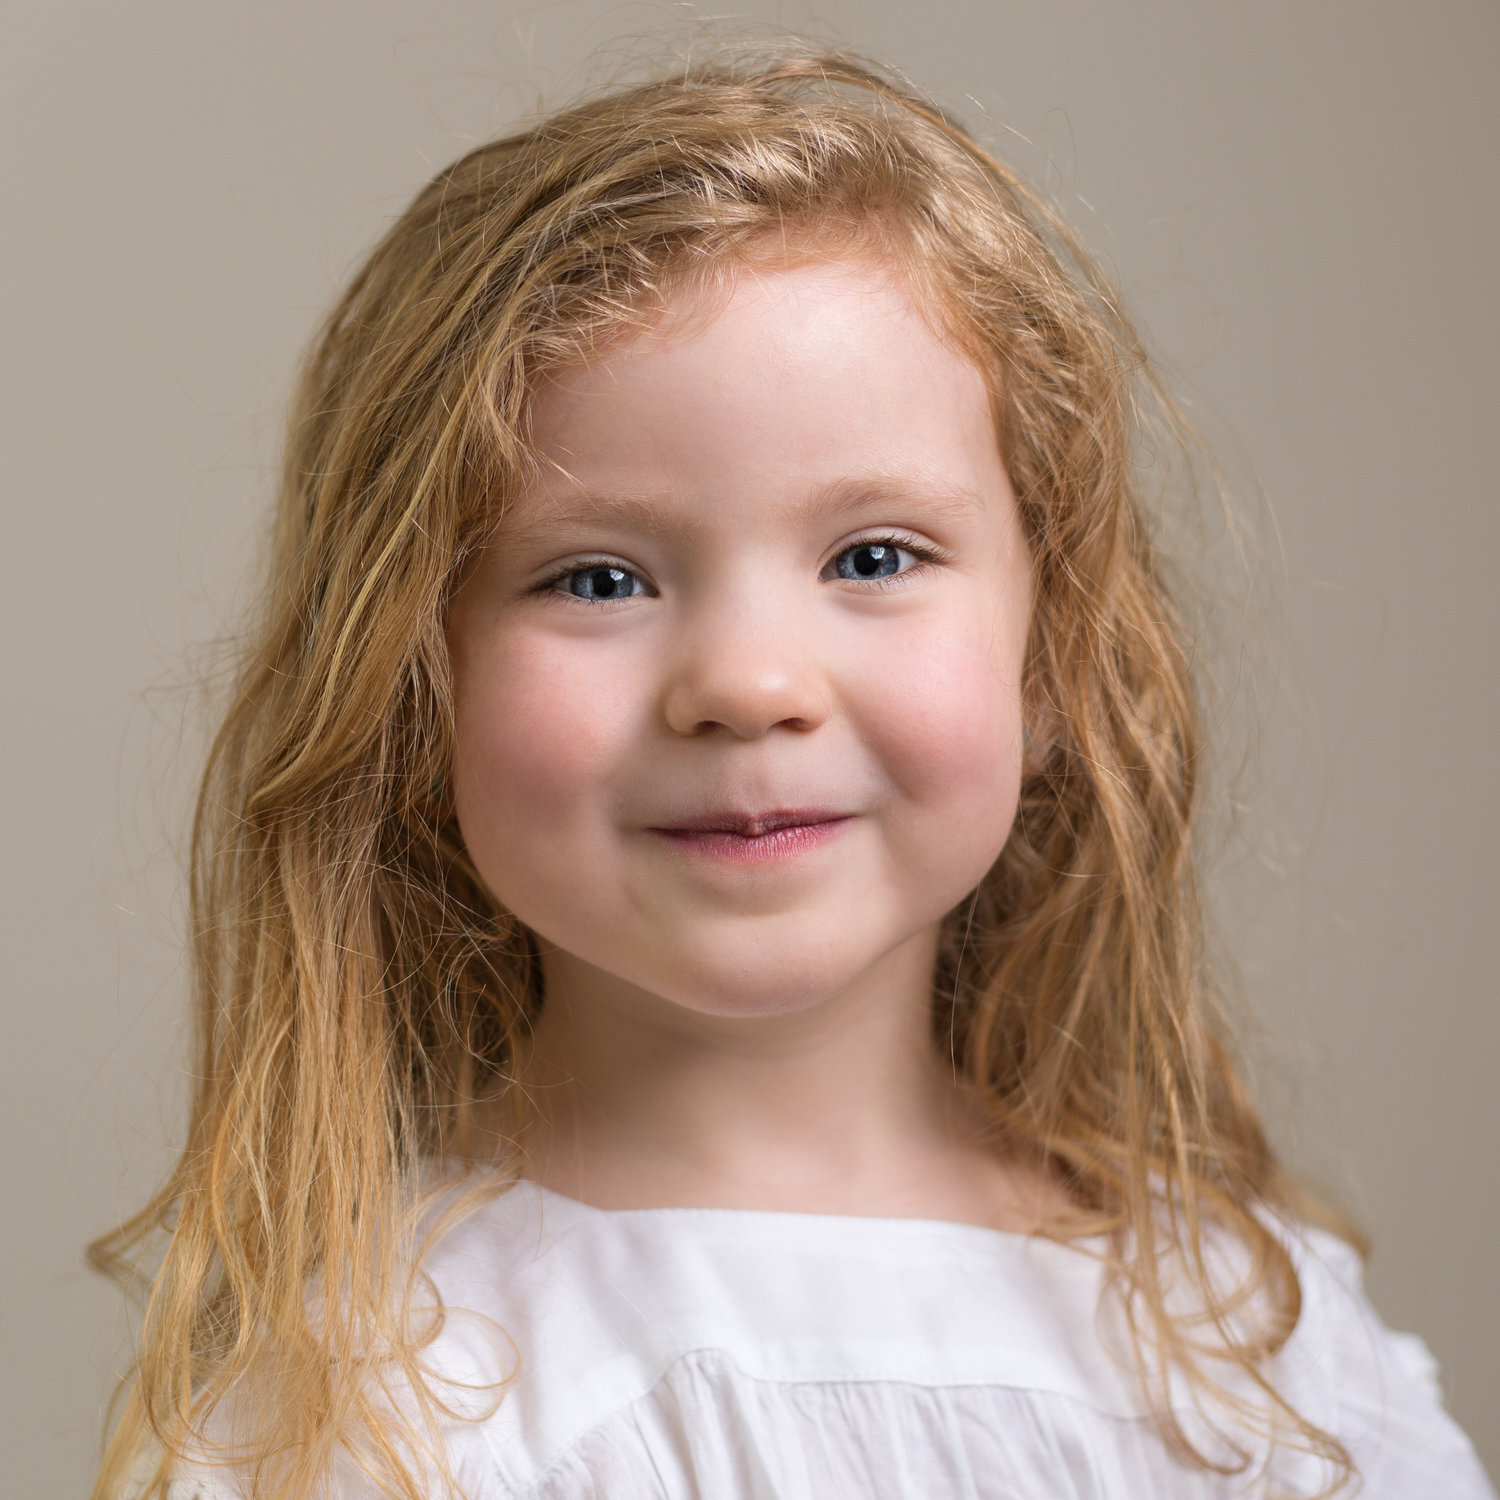 Lea-cooper-photography_child-photography-willenhall_child-photography-wolverhampton_child-photography-west-midlands_child-photography_curly-hair-cheeky-face.jpg